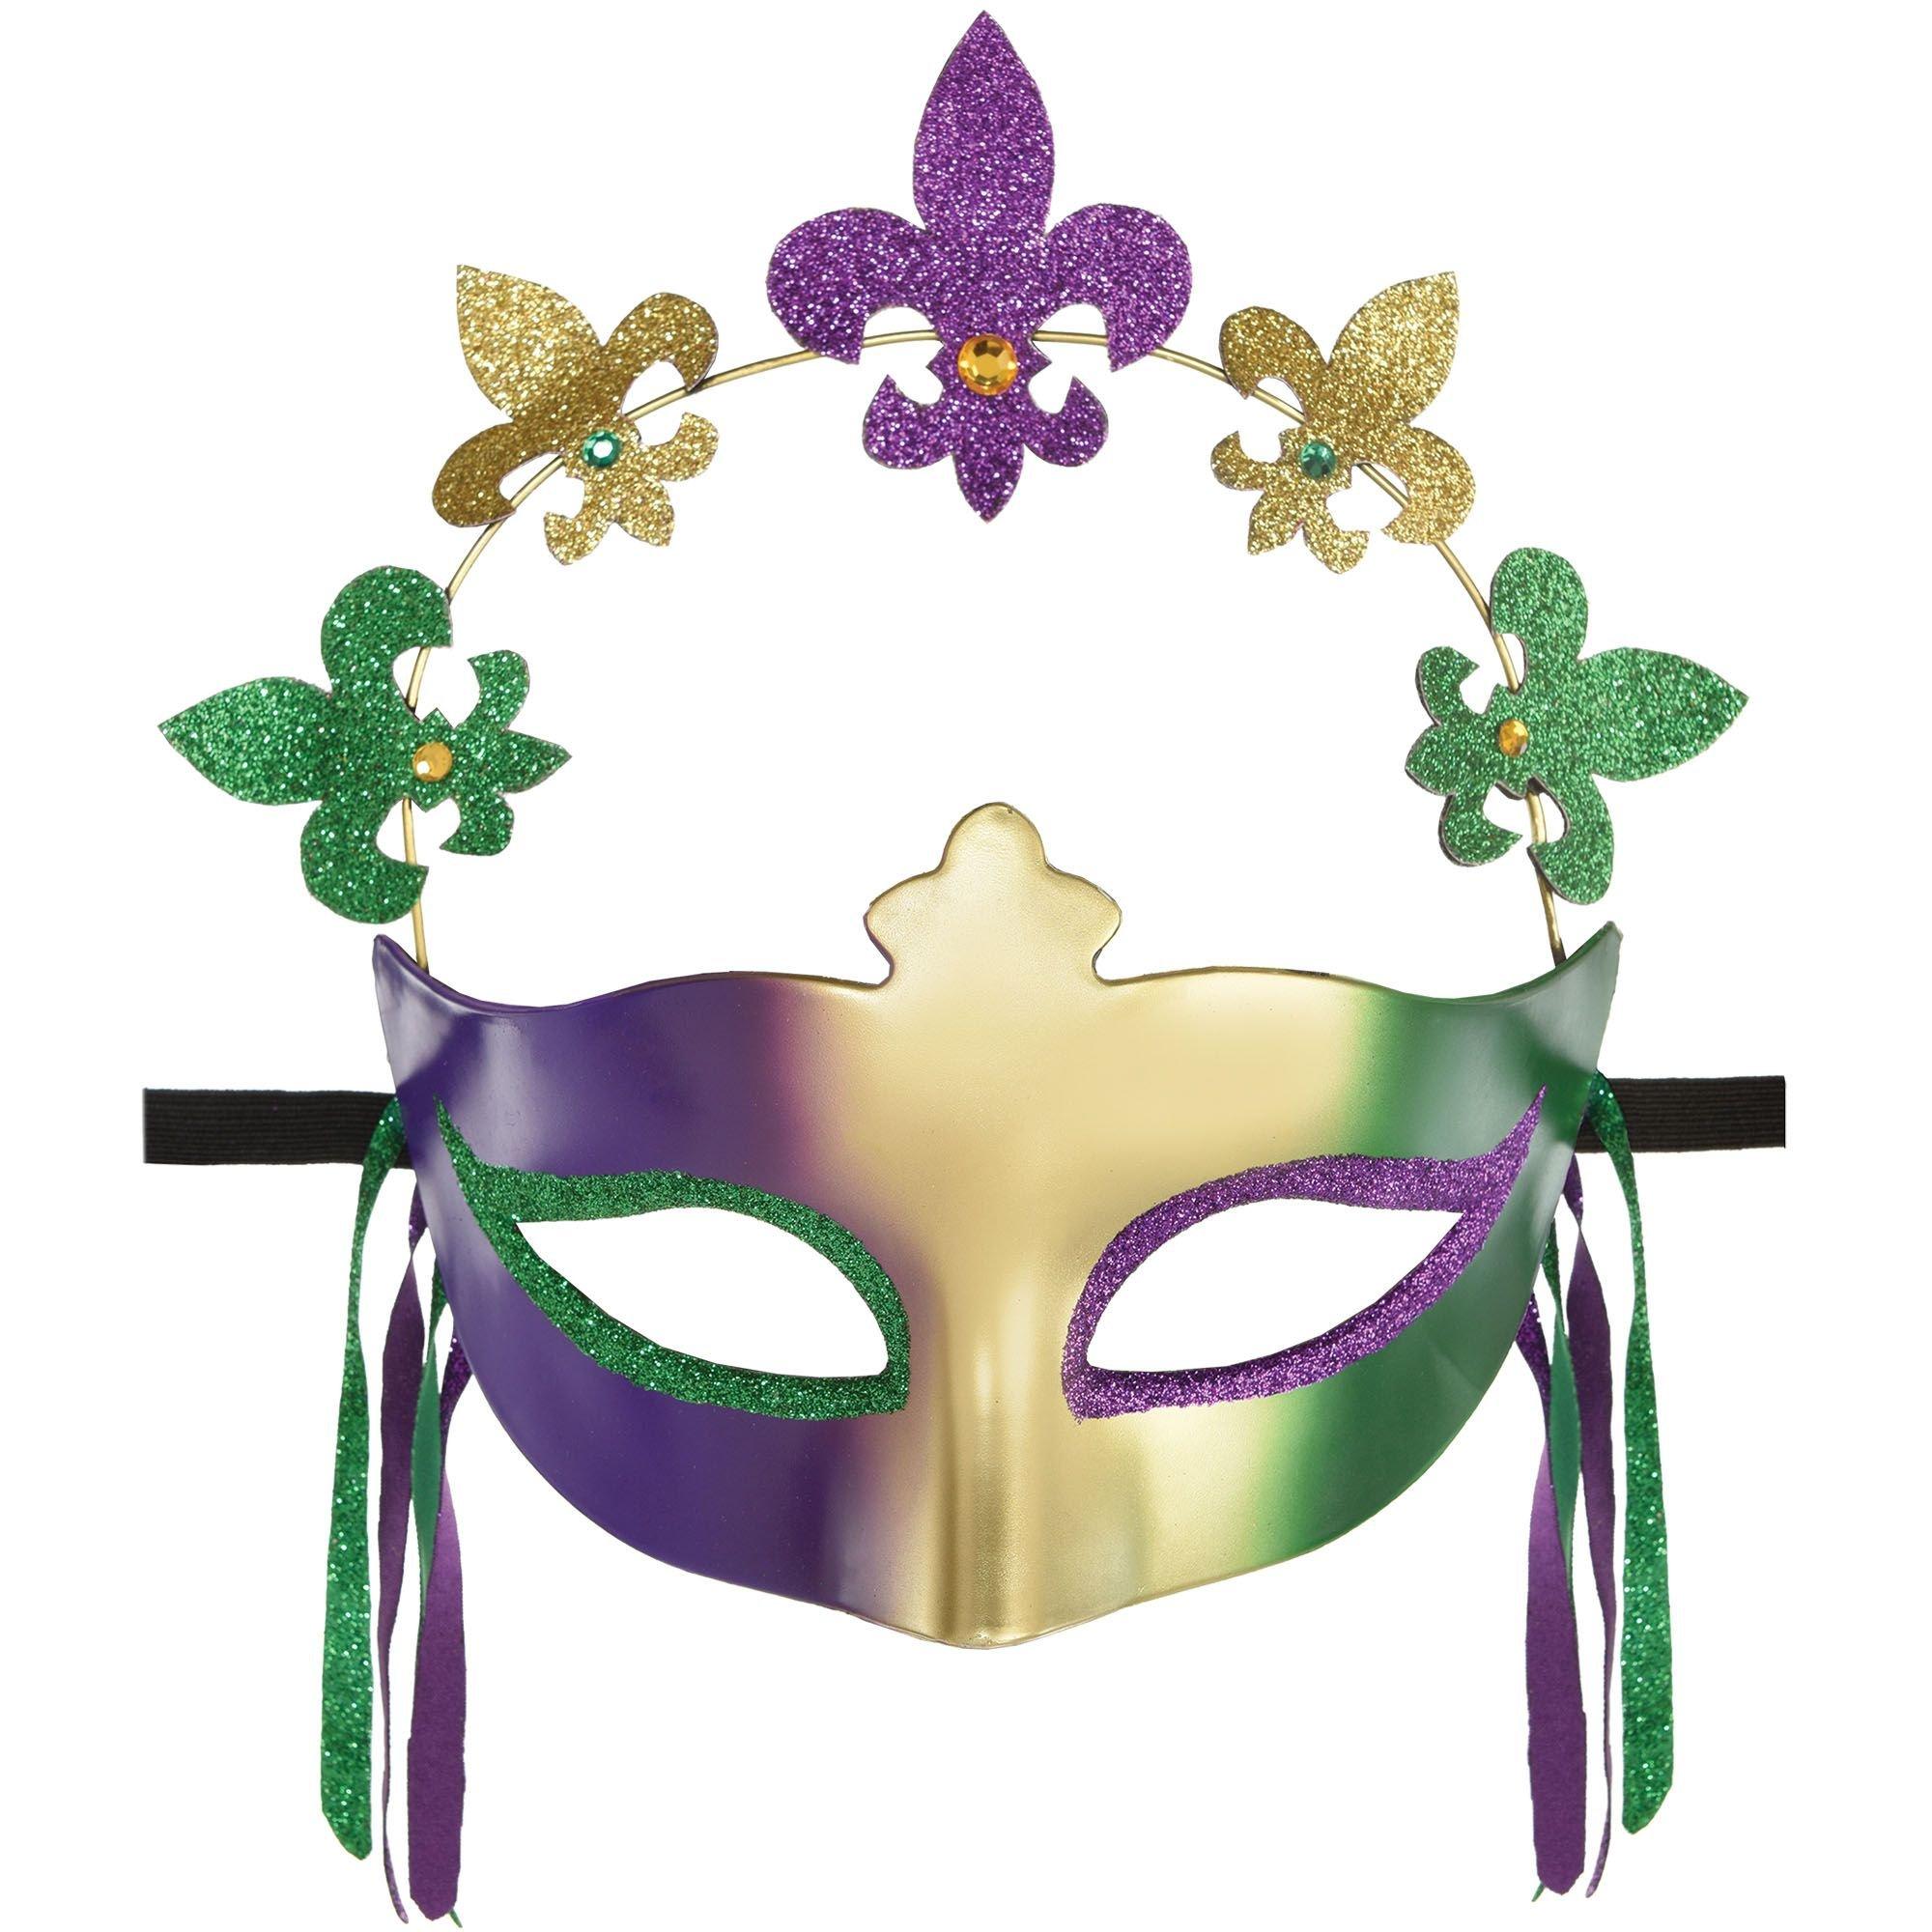 GIANT Mardi Gras Ornaments. Perfect for a Mardi Gras Ball or party